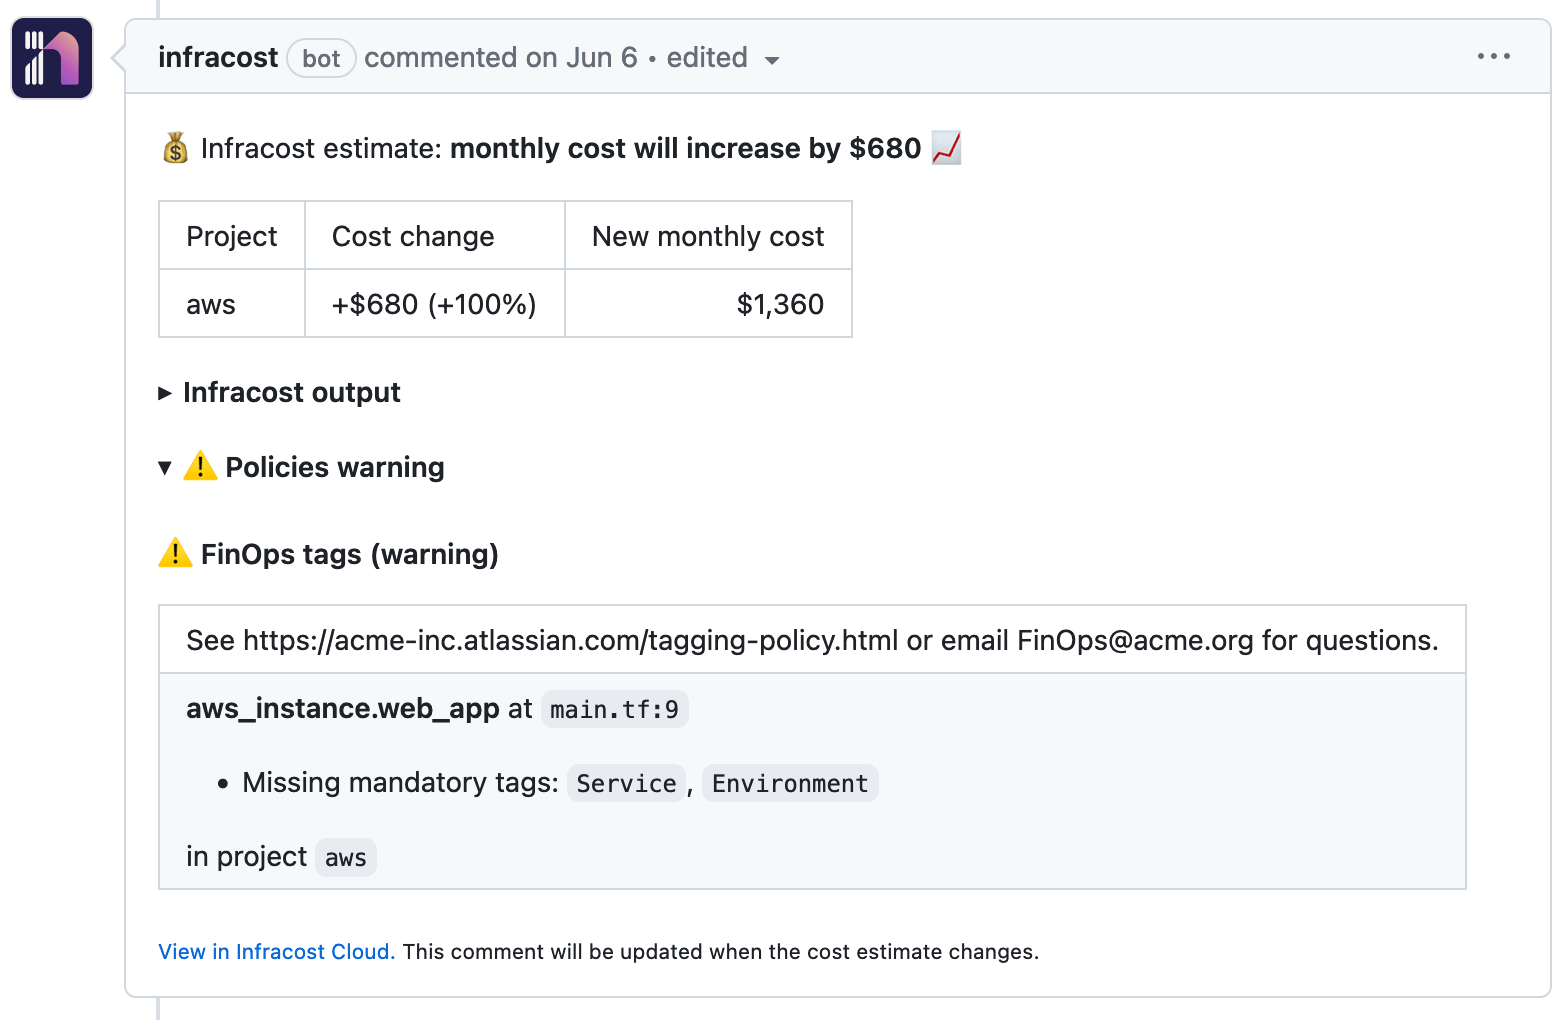 Create a pull request to test your tagging policy.